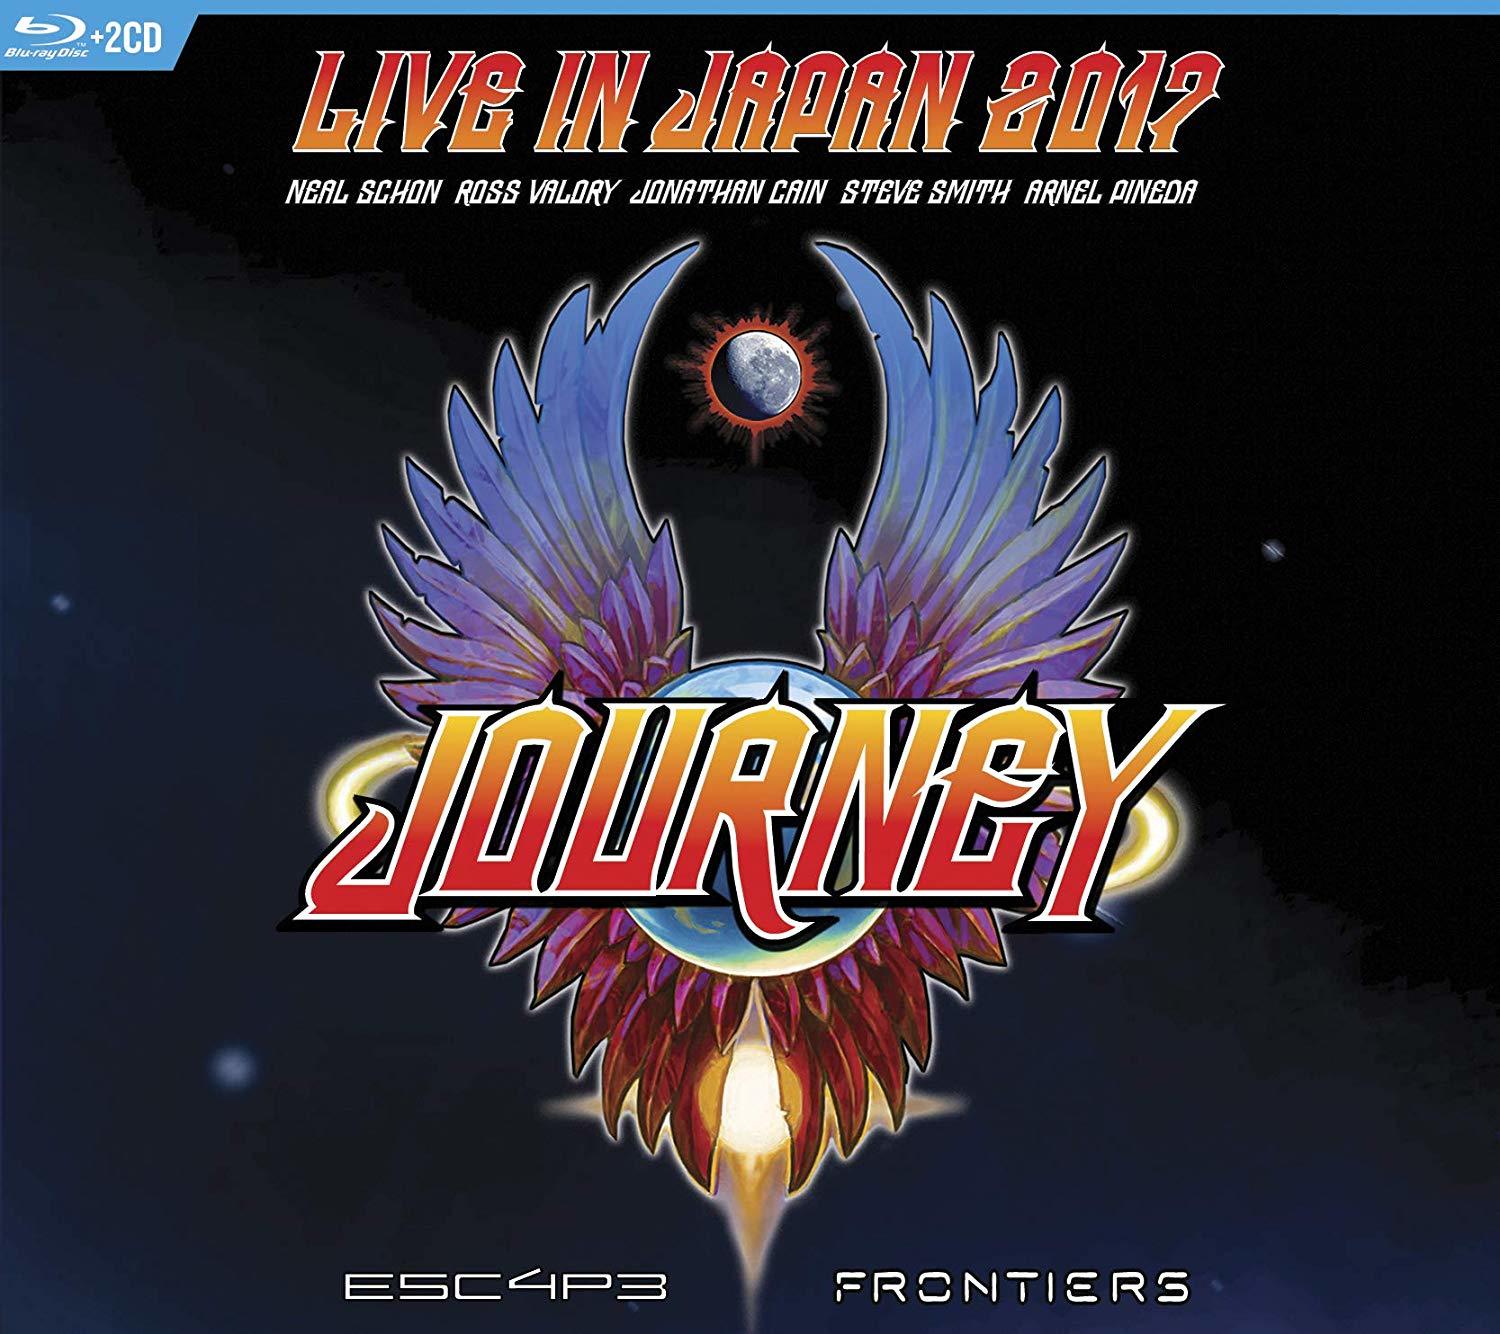 Journey: Escape and Frontiers - Live in Japan 2017 Blu-ray (DigiPack)